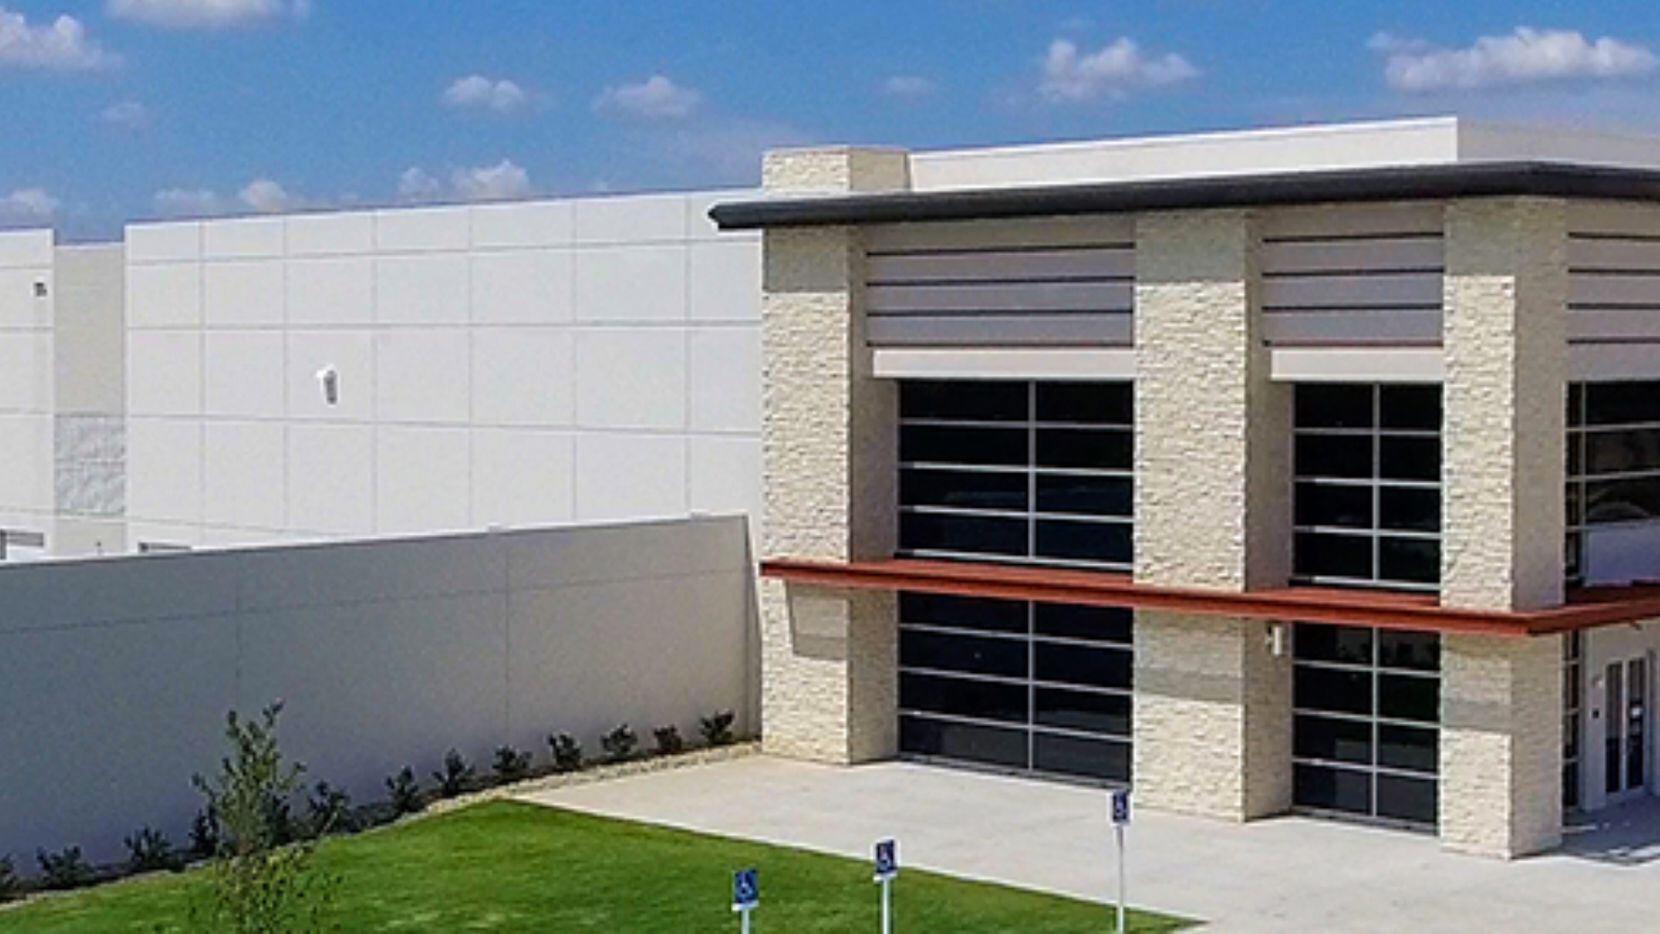 Trammell Crow Co.'s 35 Eagle business park in North Fort Worth is more than 300 acres.